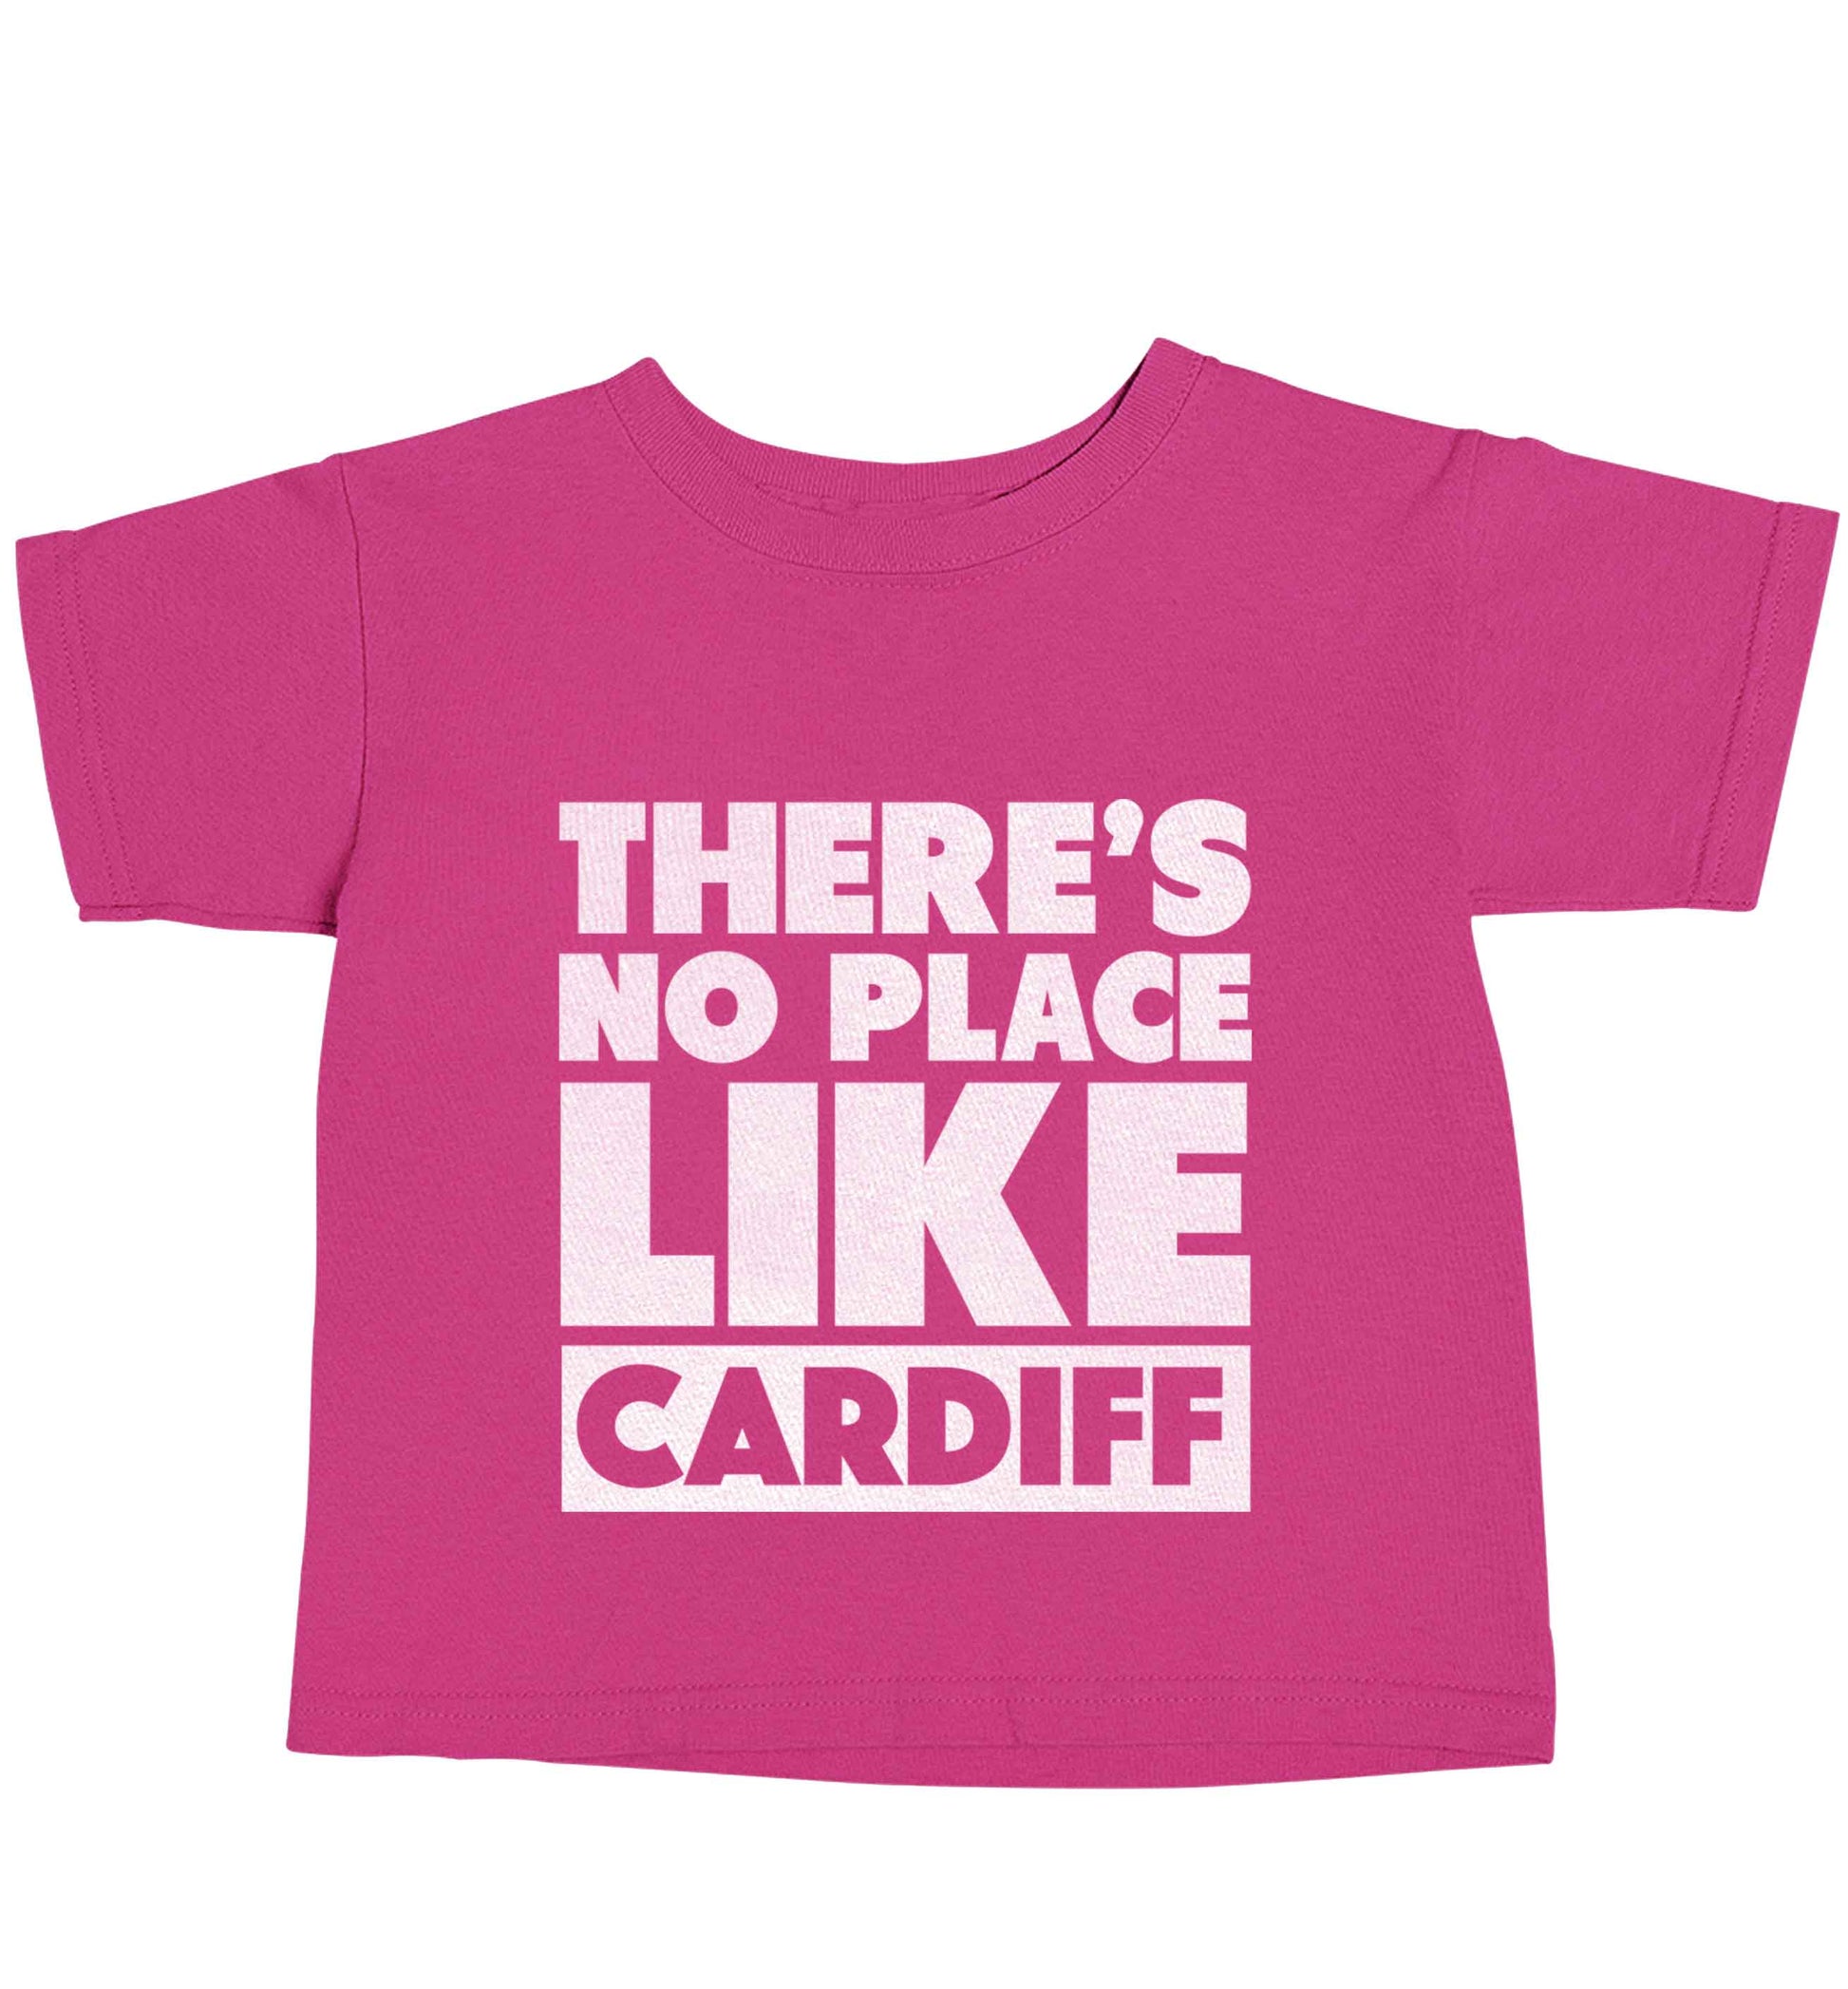 There's no place like Cardiff pink baby toddler Tshirt 2 Years